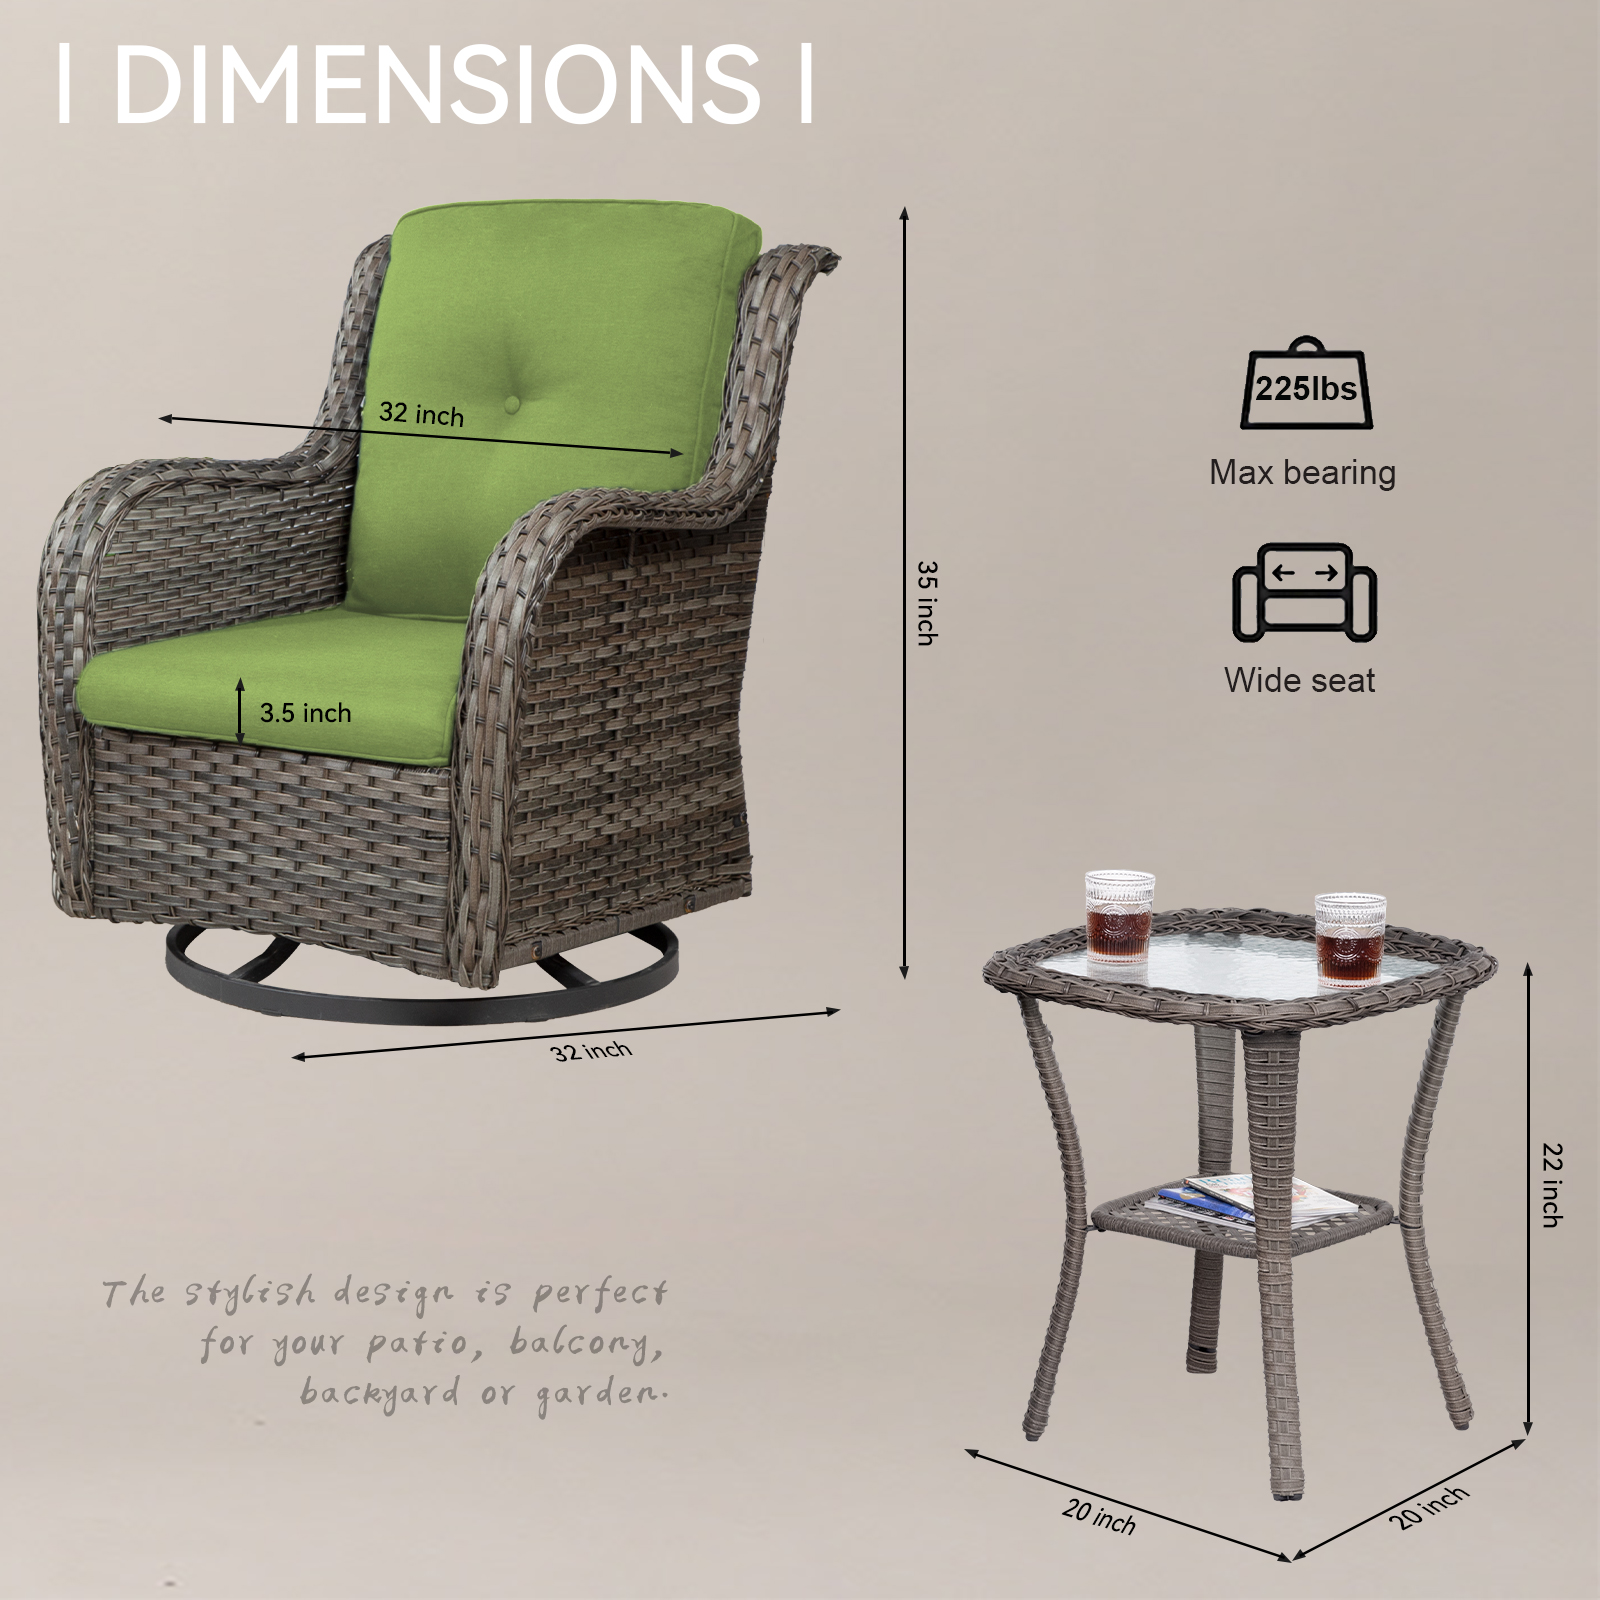 Meetleisure Outdoor Swivel Rocker Wicker Patio Chairs Sets of 2 With Table, Green - image 3 of 6